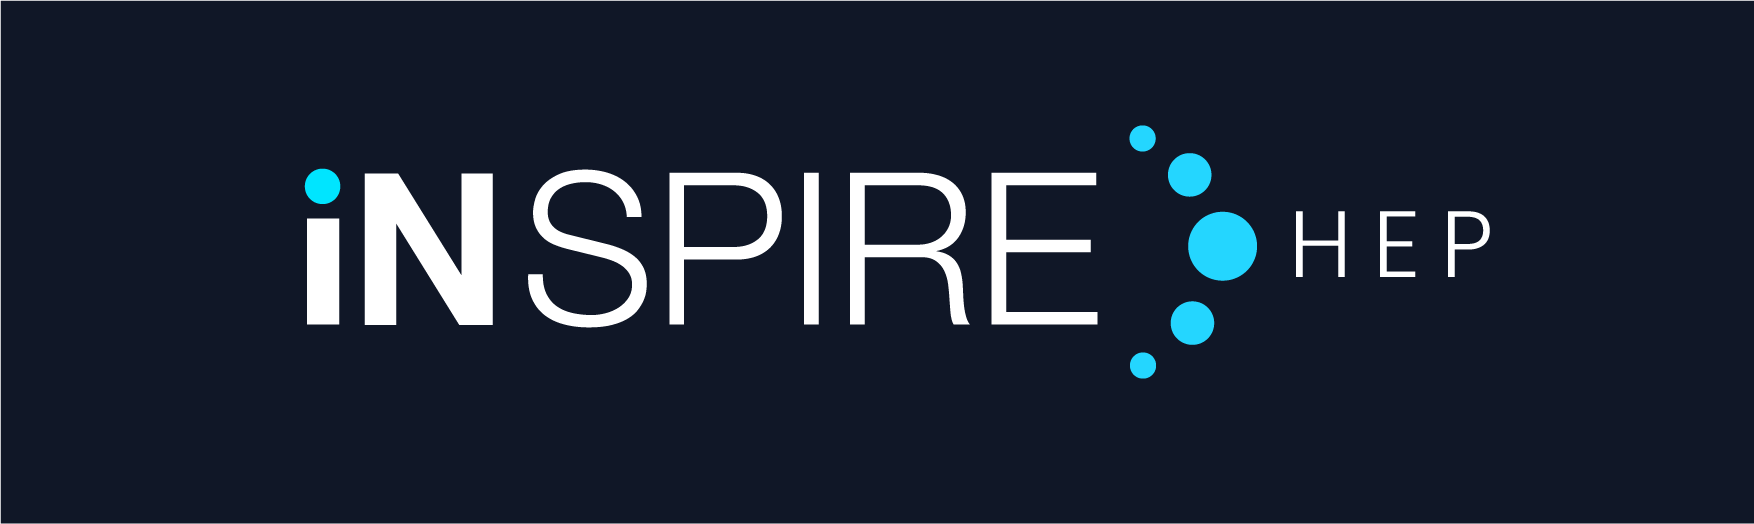 INSPIRE HEP on Twitter: &quot;The next generation of INSPIRE is coming. The  current system will be phased out. Explore the new INSPIRE here:  https://t.co/hjuLd1FnbB https://t.co/zBHiltAsXt&quot; / Twitter